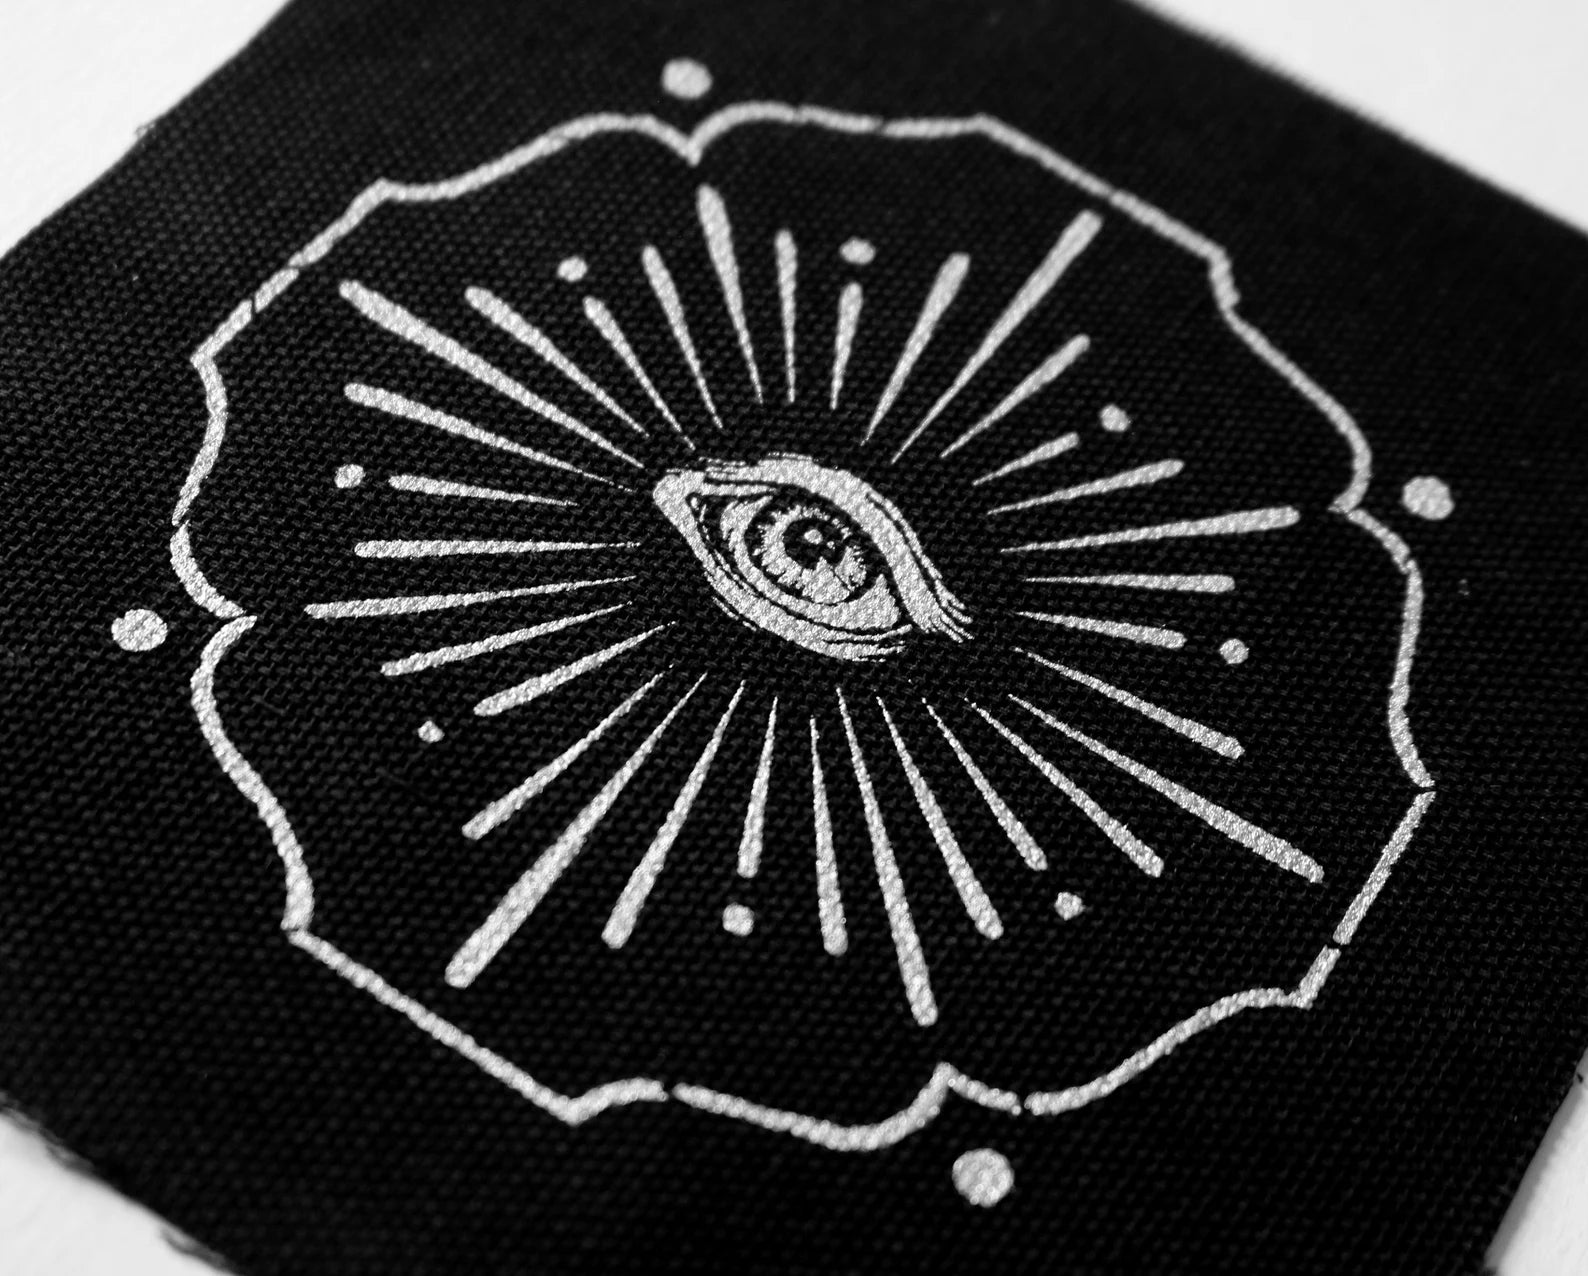 "Vision" Screen Printed Patch